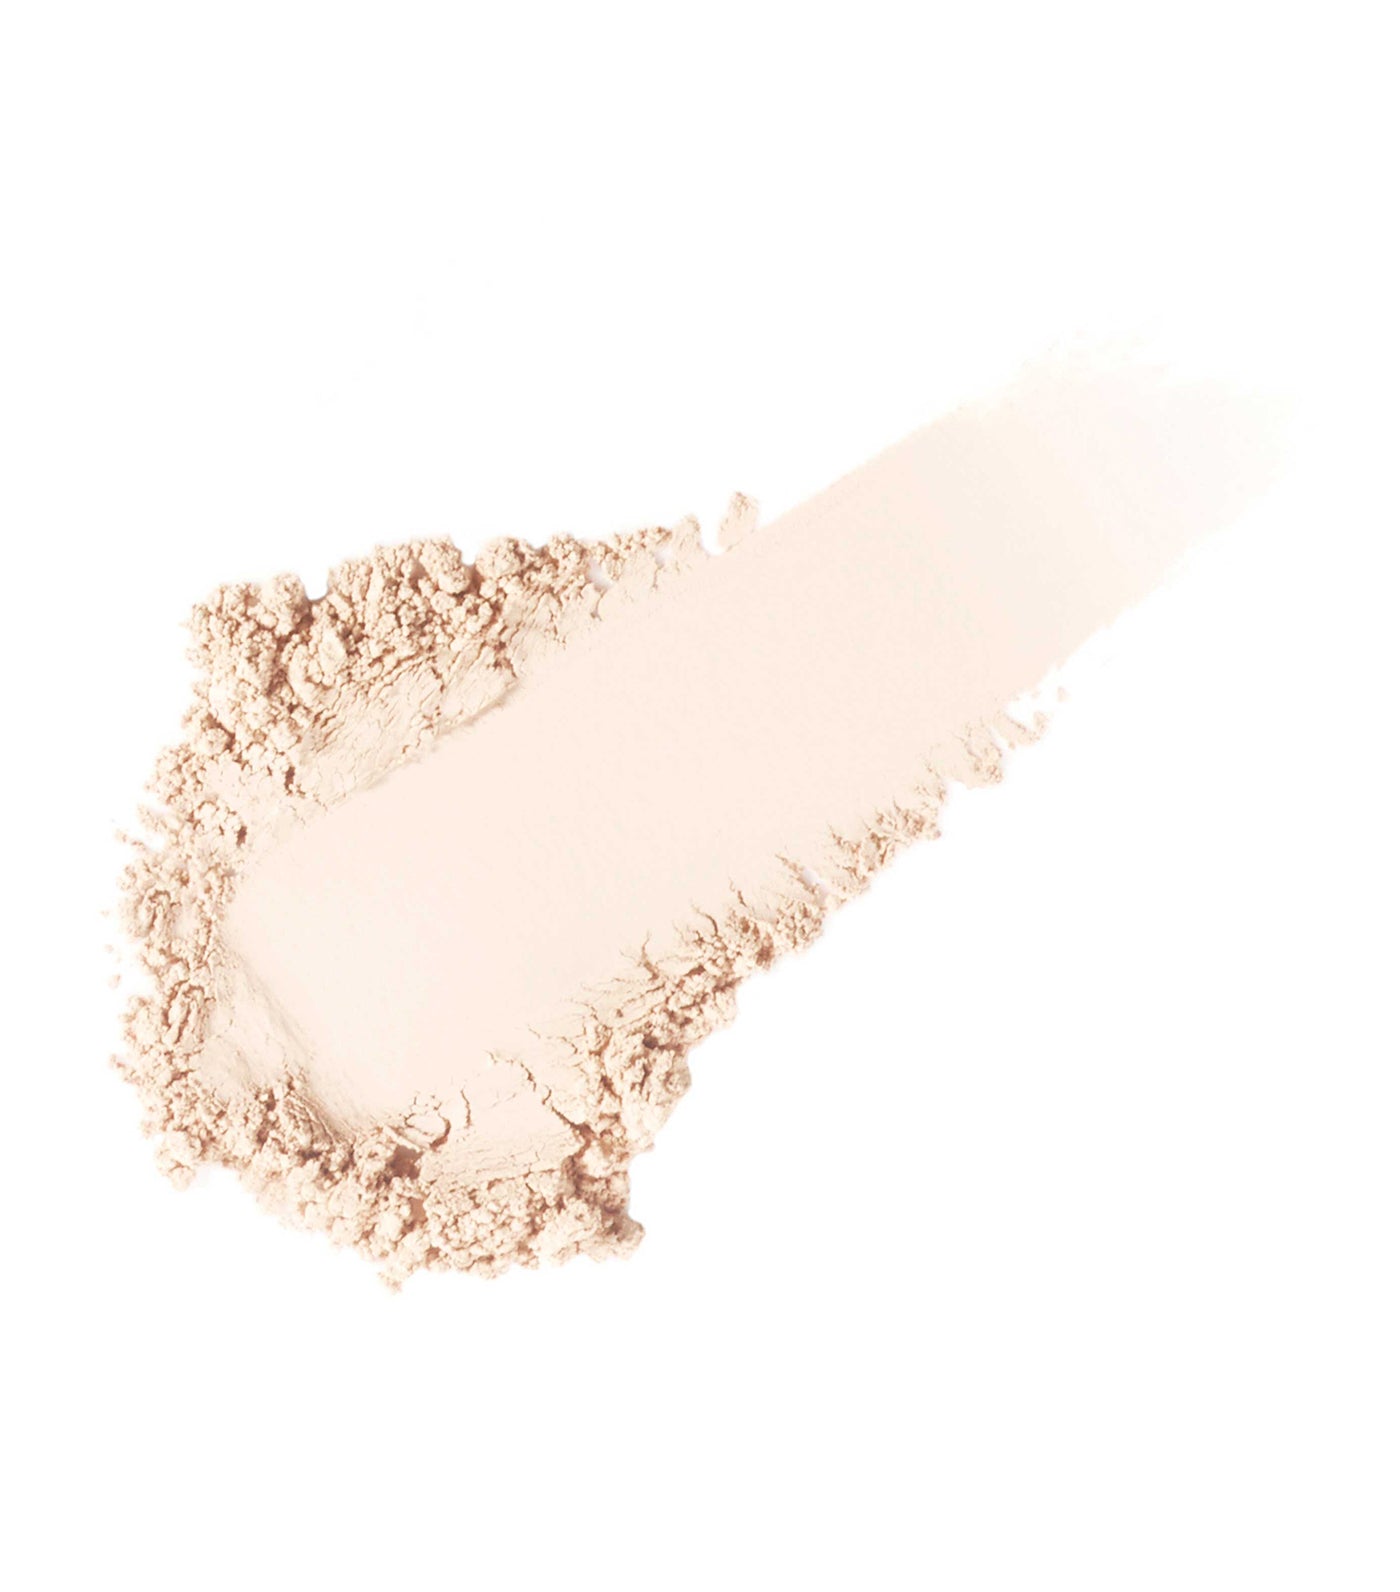 jane iredale Powder-Me SPF® 30 Dry Sunscreen - Refillable translucent